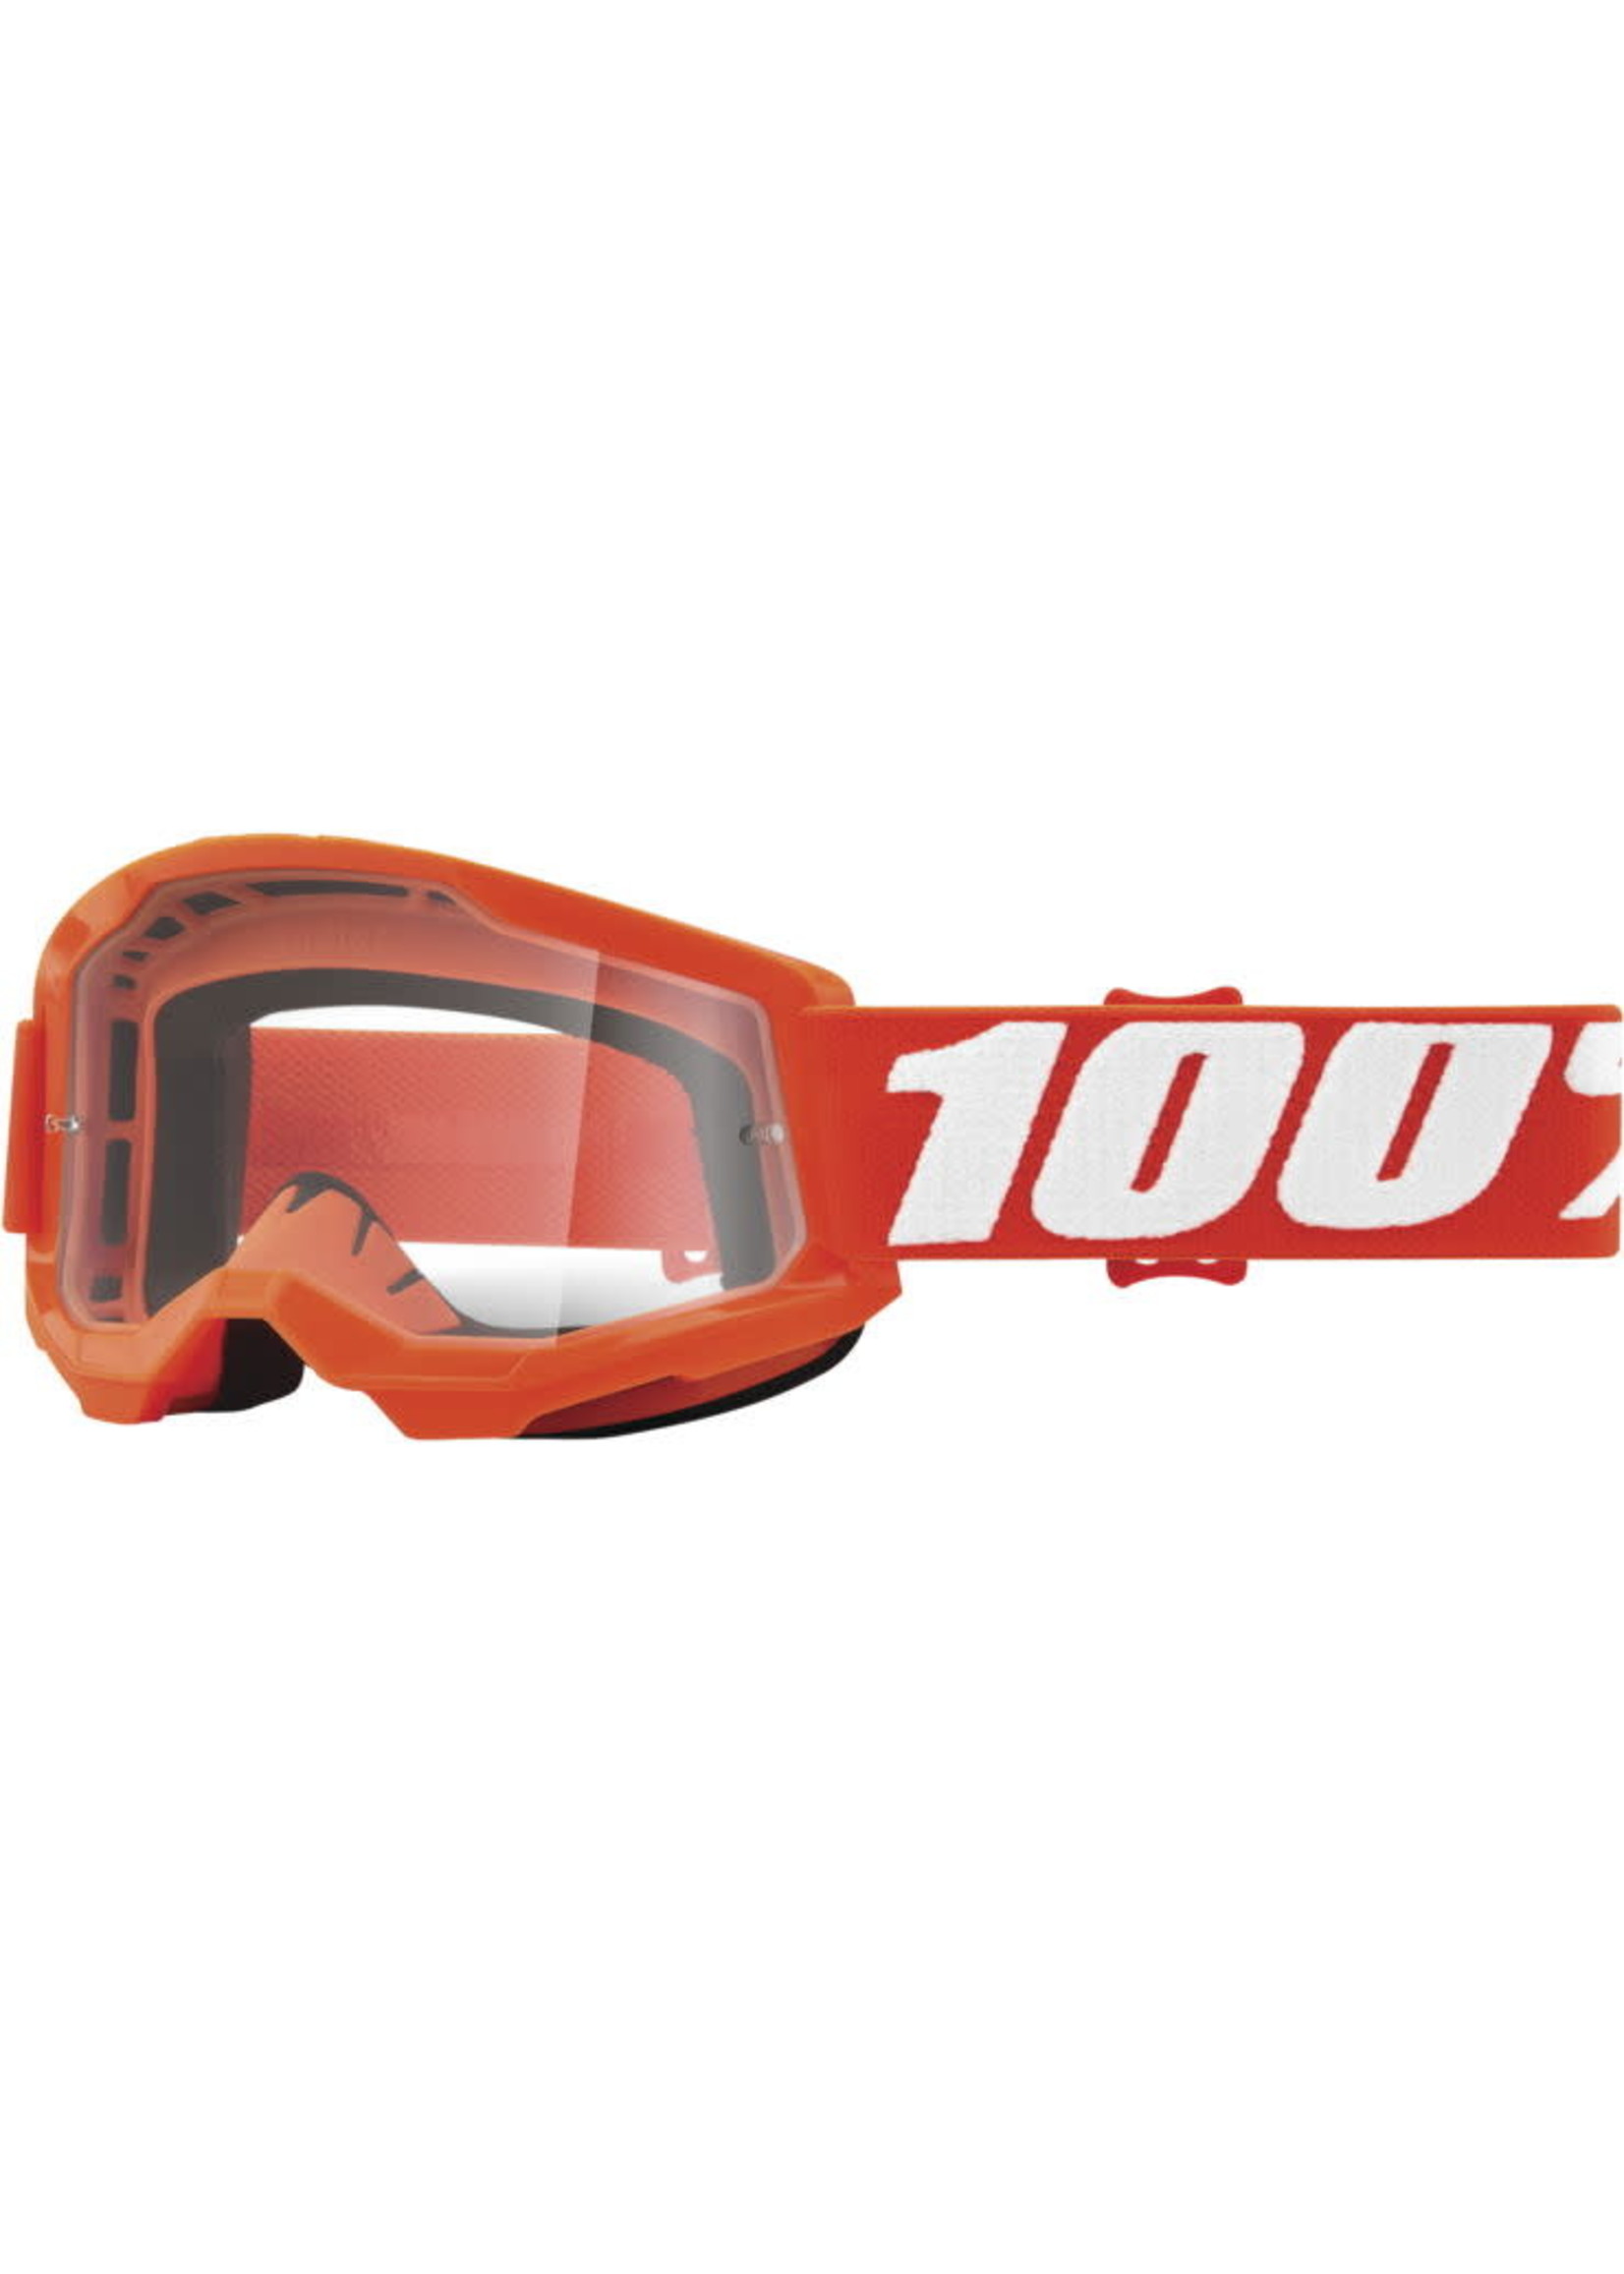 100% 100% STRATA JR. 2 GOGGLE ORANGE WITH CLEAR LENS